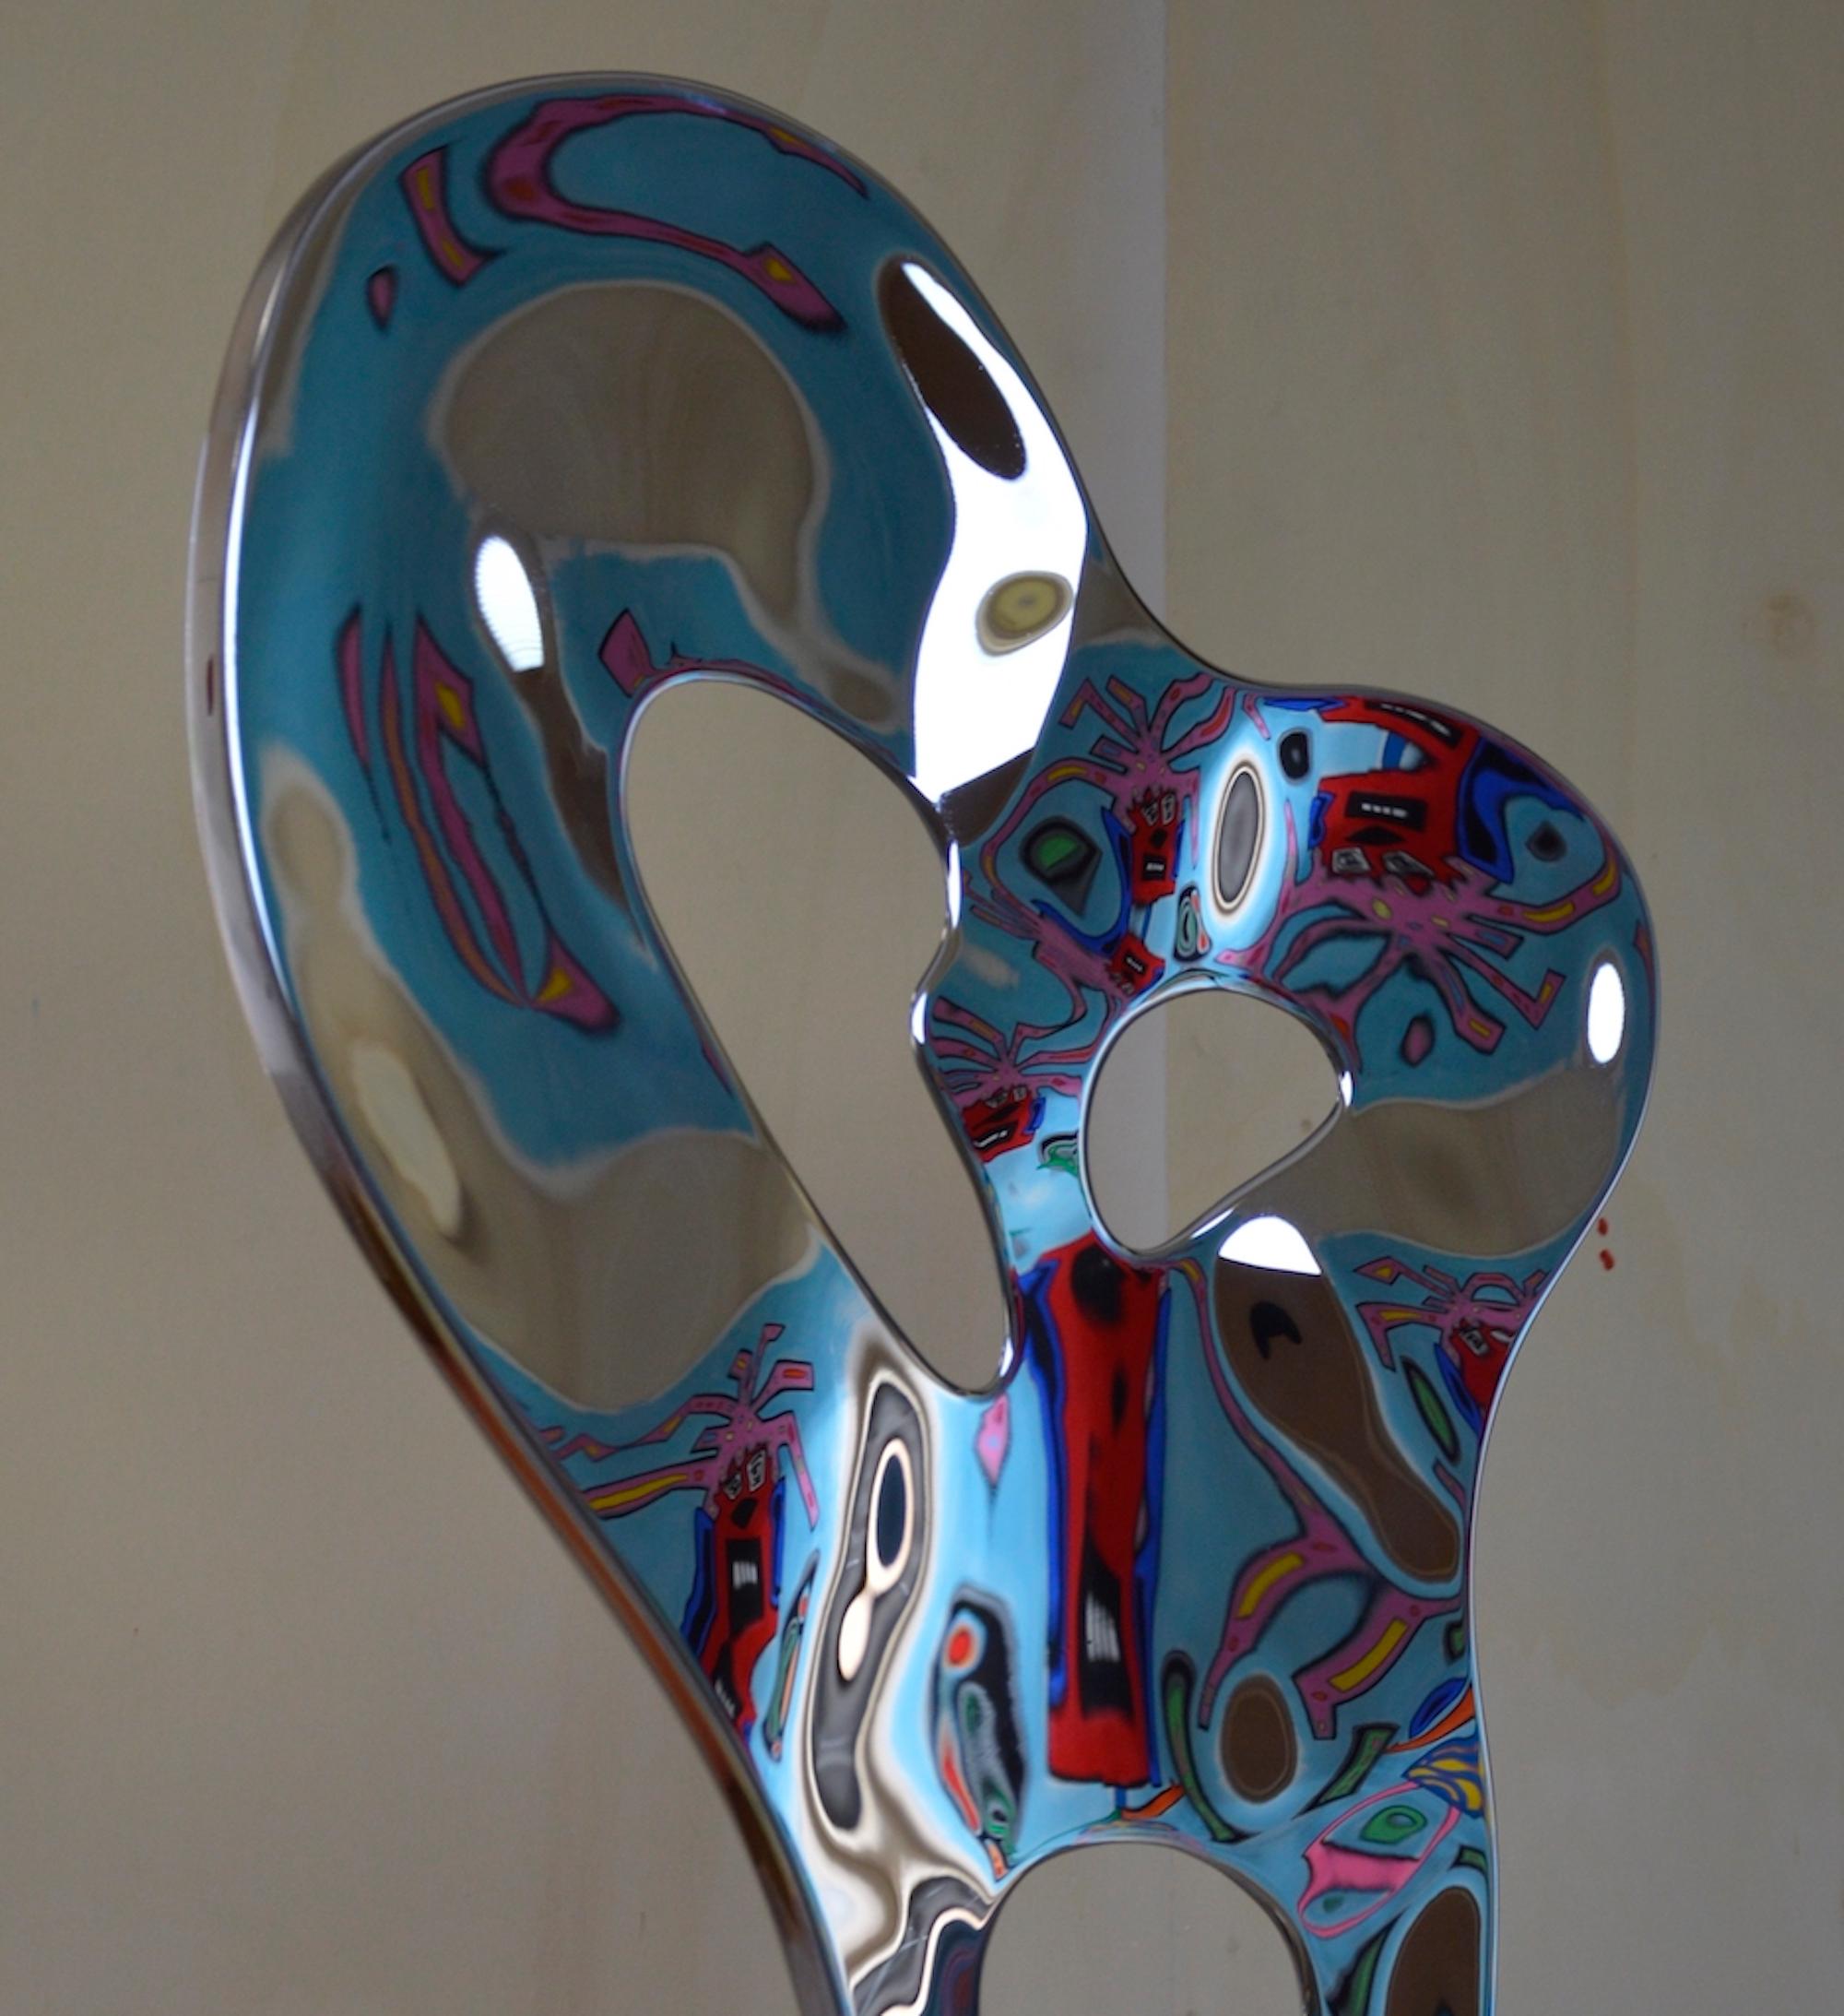 Ectoplasm II by Franck K - Stainless steel sculpture, reflections, light, vision For Sale 4